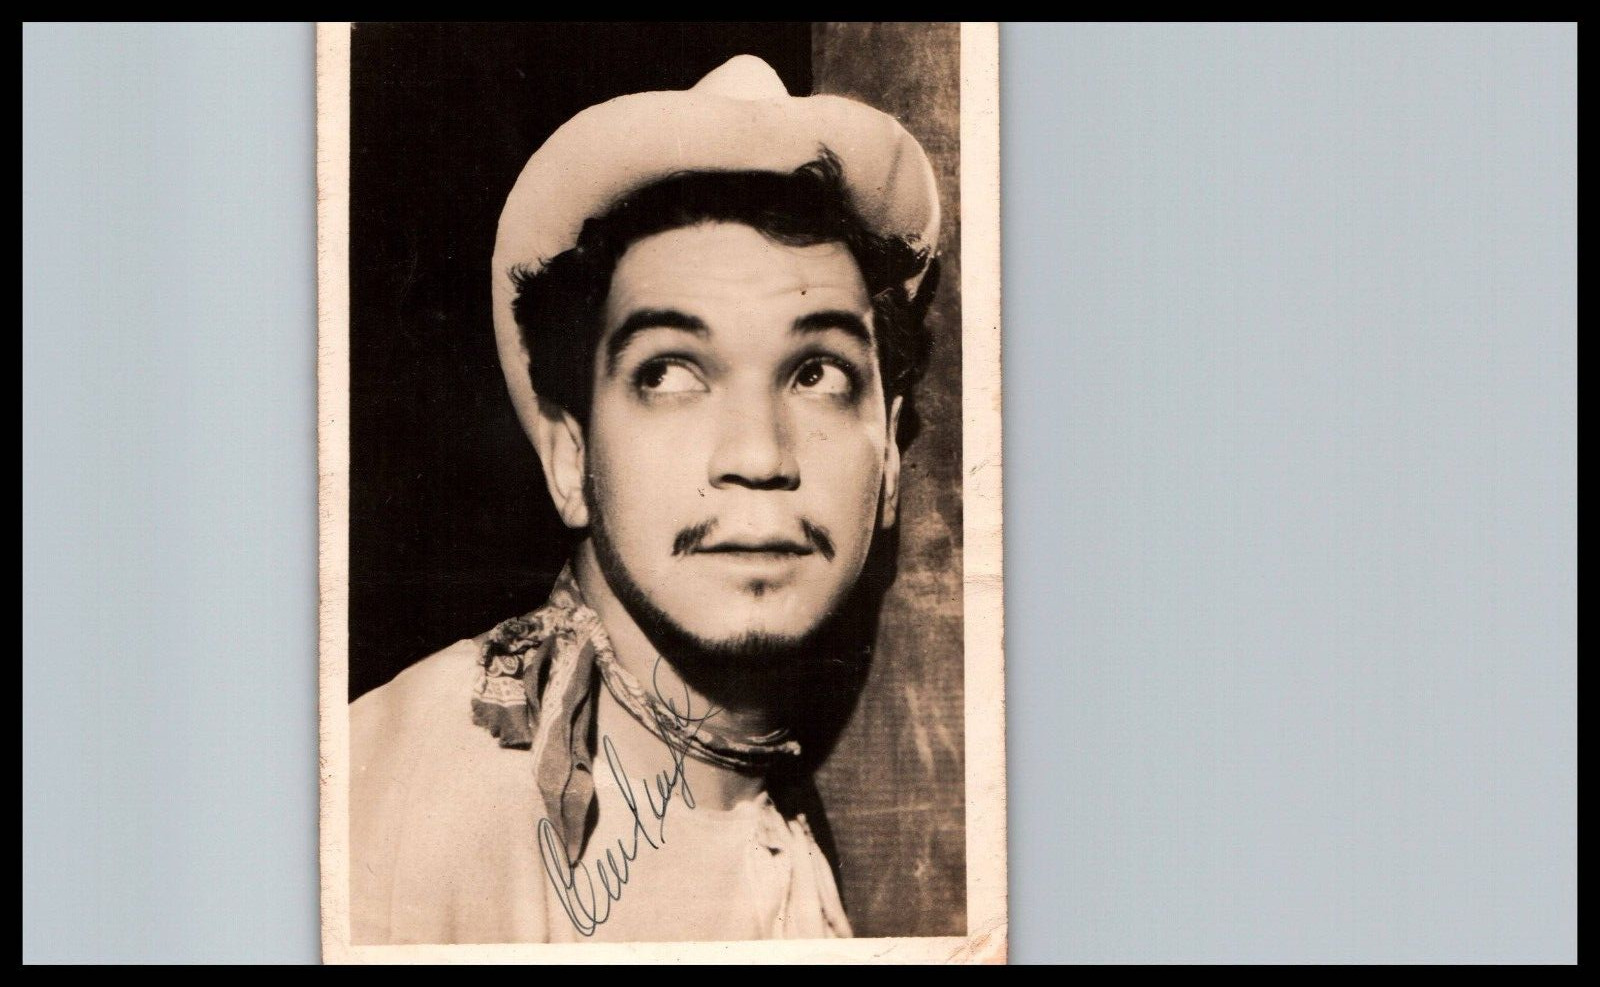 MEXICAN LEGENDARY COMEDY MARIO MORENO CANTINFLAS SIGNED 50s AUTOGRAPH PHOTO 200